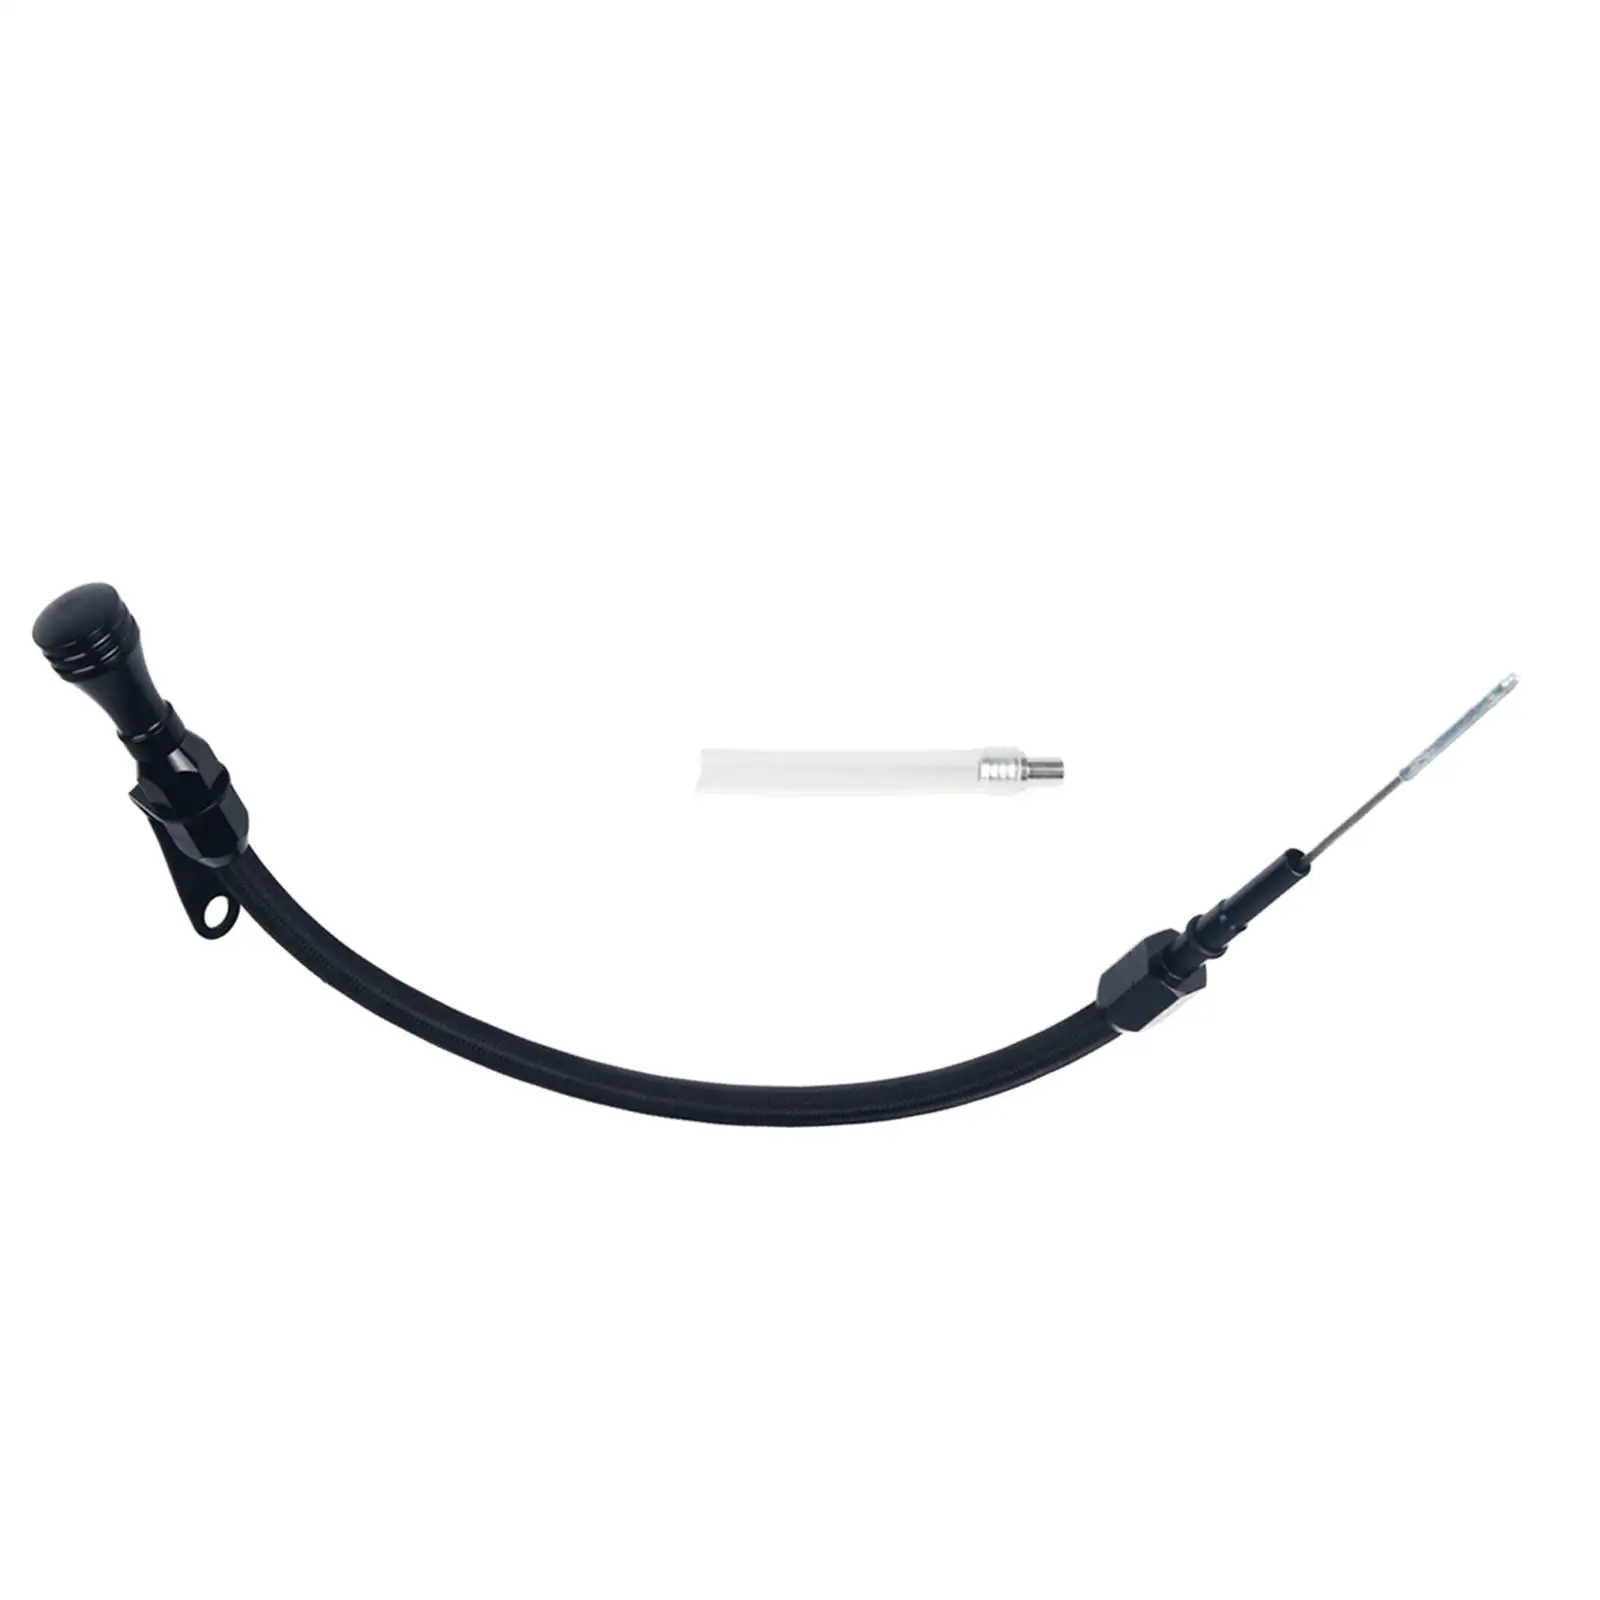 Stainless Steel Flexible Oil Dipstick Accurate Readings Oil Level Dipstick Accessory for LS2 LS2 LS6 5.7L 6.0L 6.2L